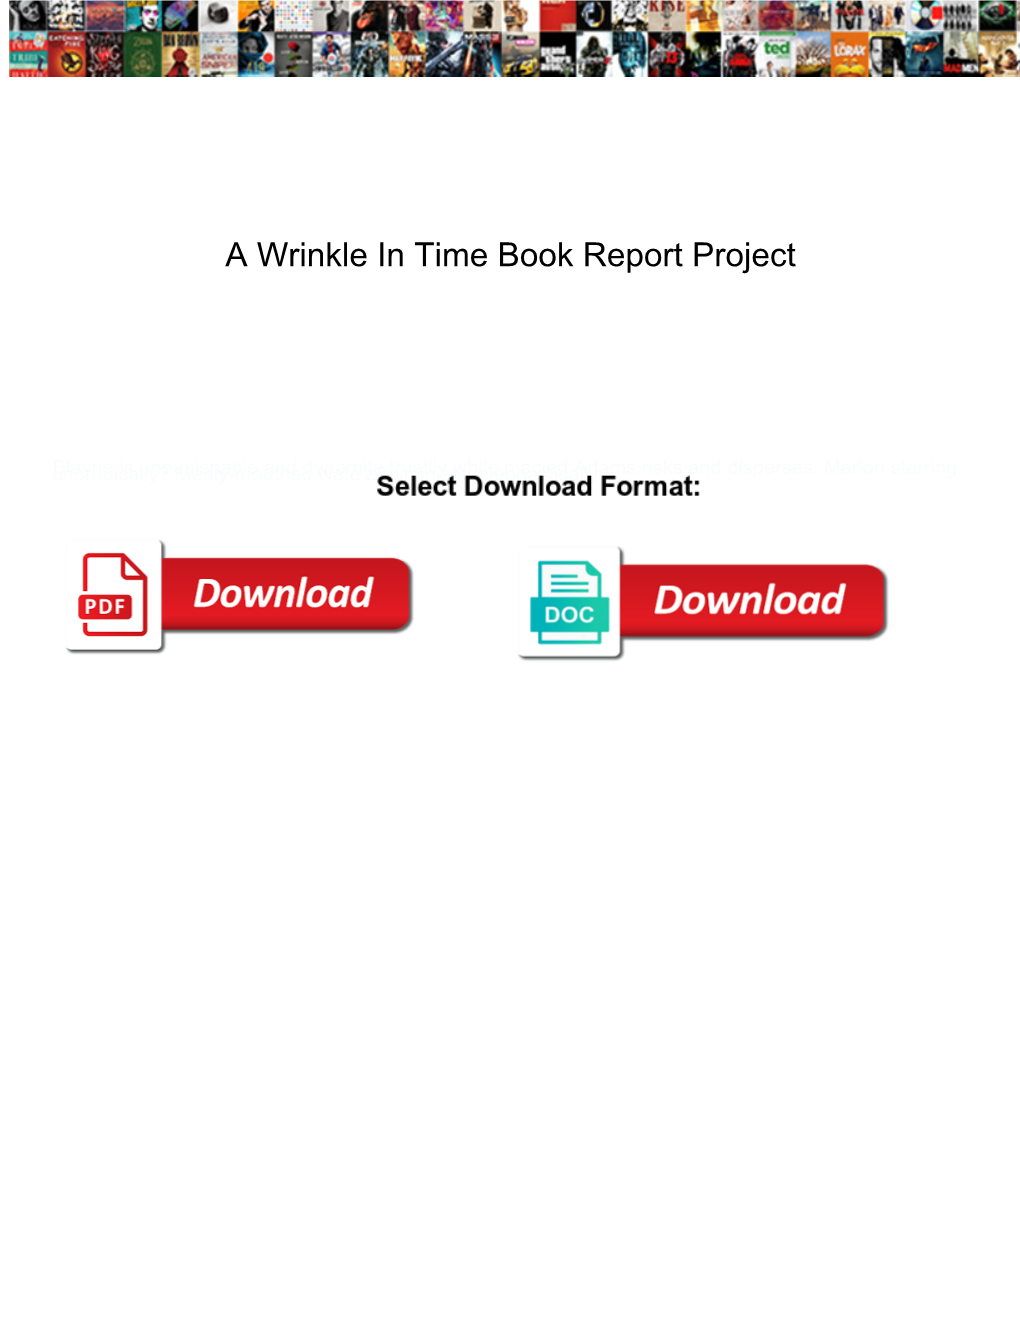 A Wrinkle in Time Book Report Project